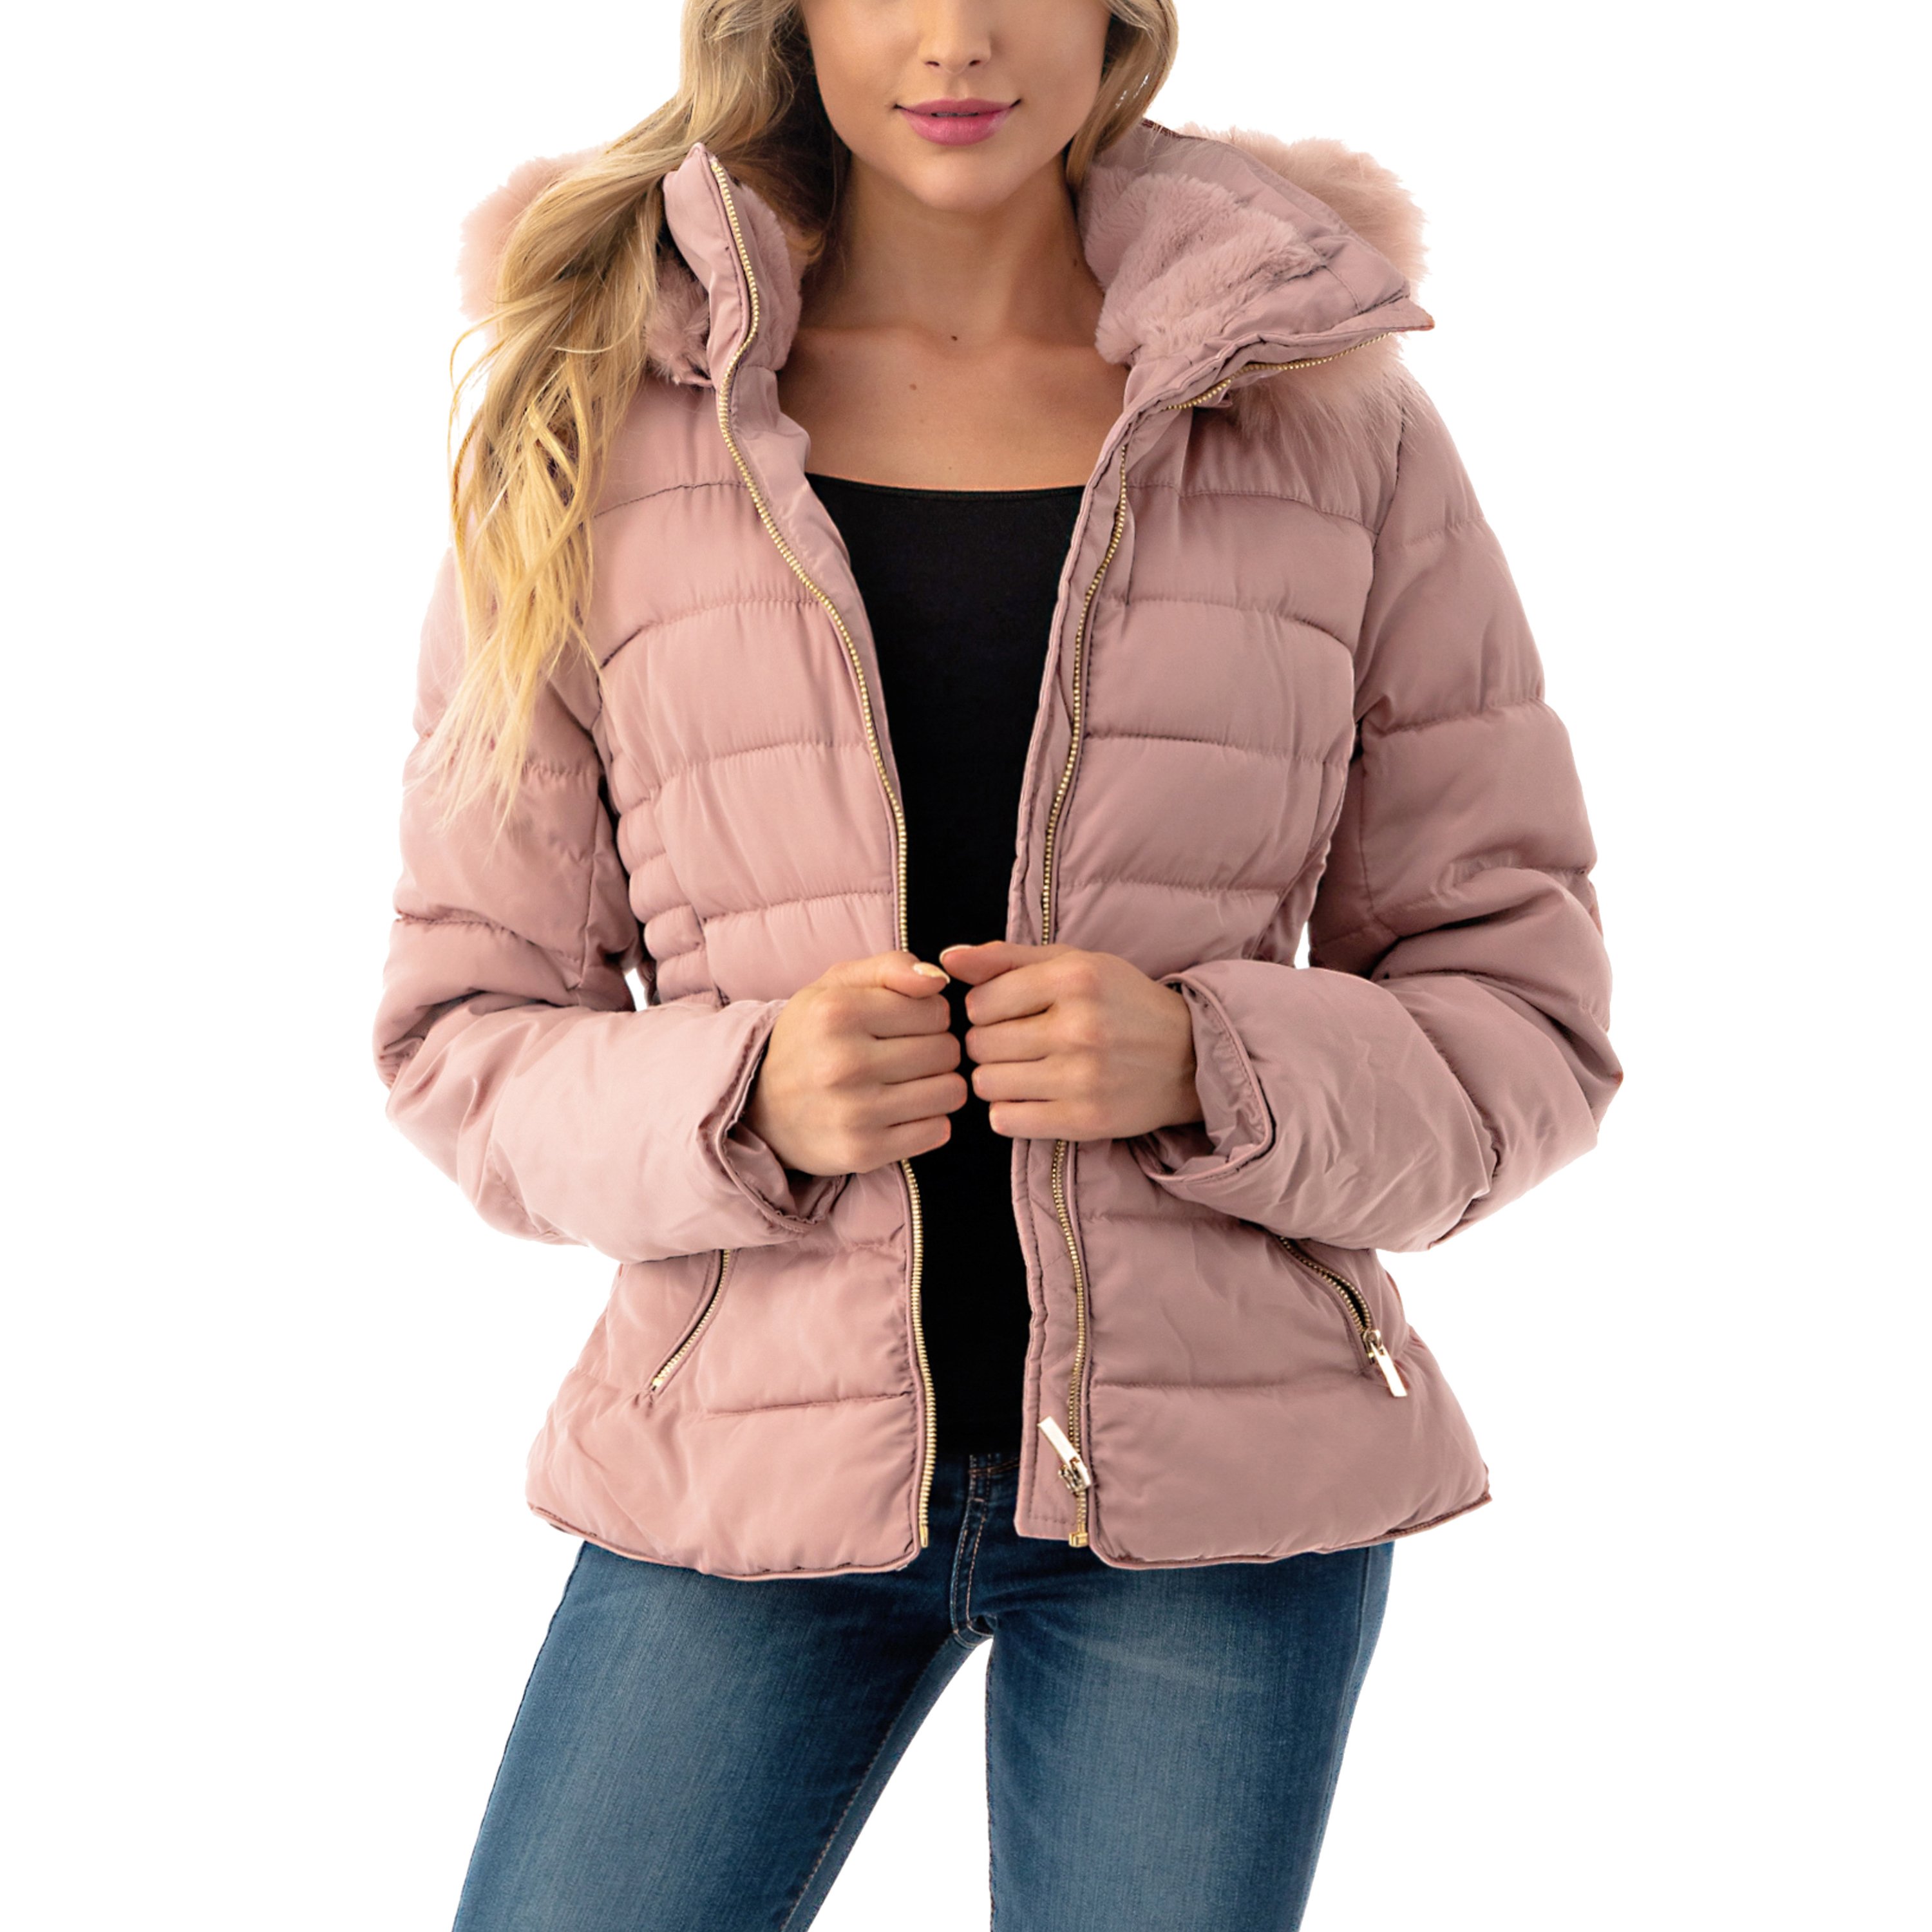 Fashionazzle Women's Short Puffer Coat with Removable Faux Fur Trim Hood Jacket - image 1 of 14